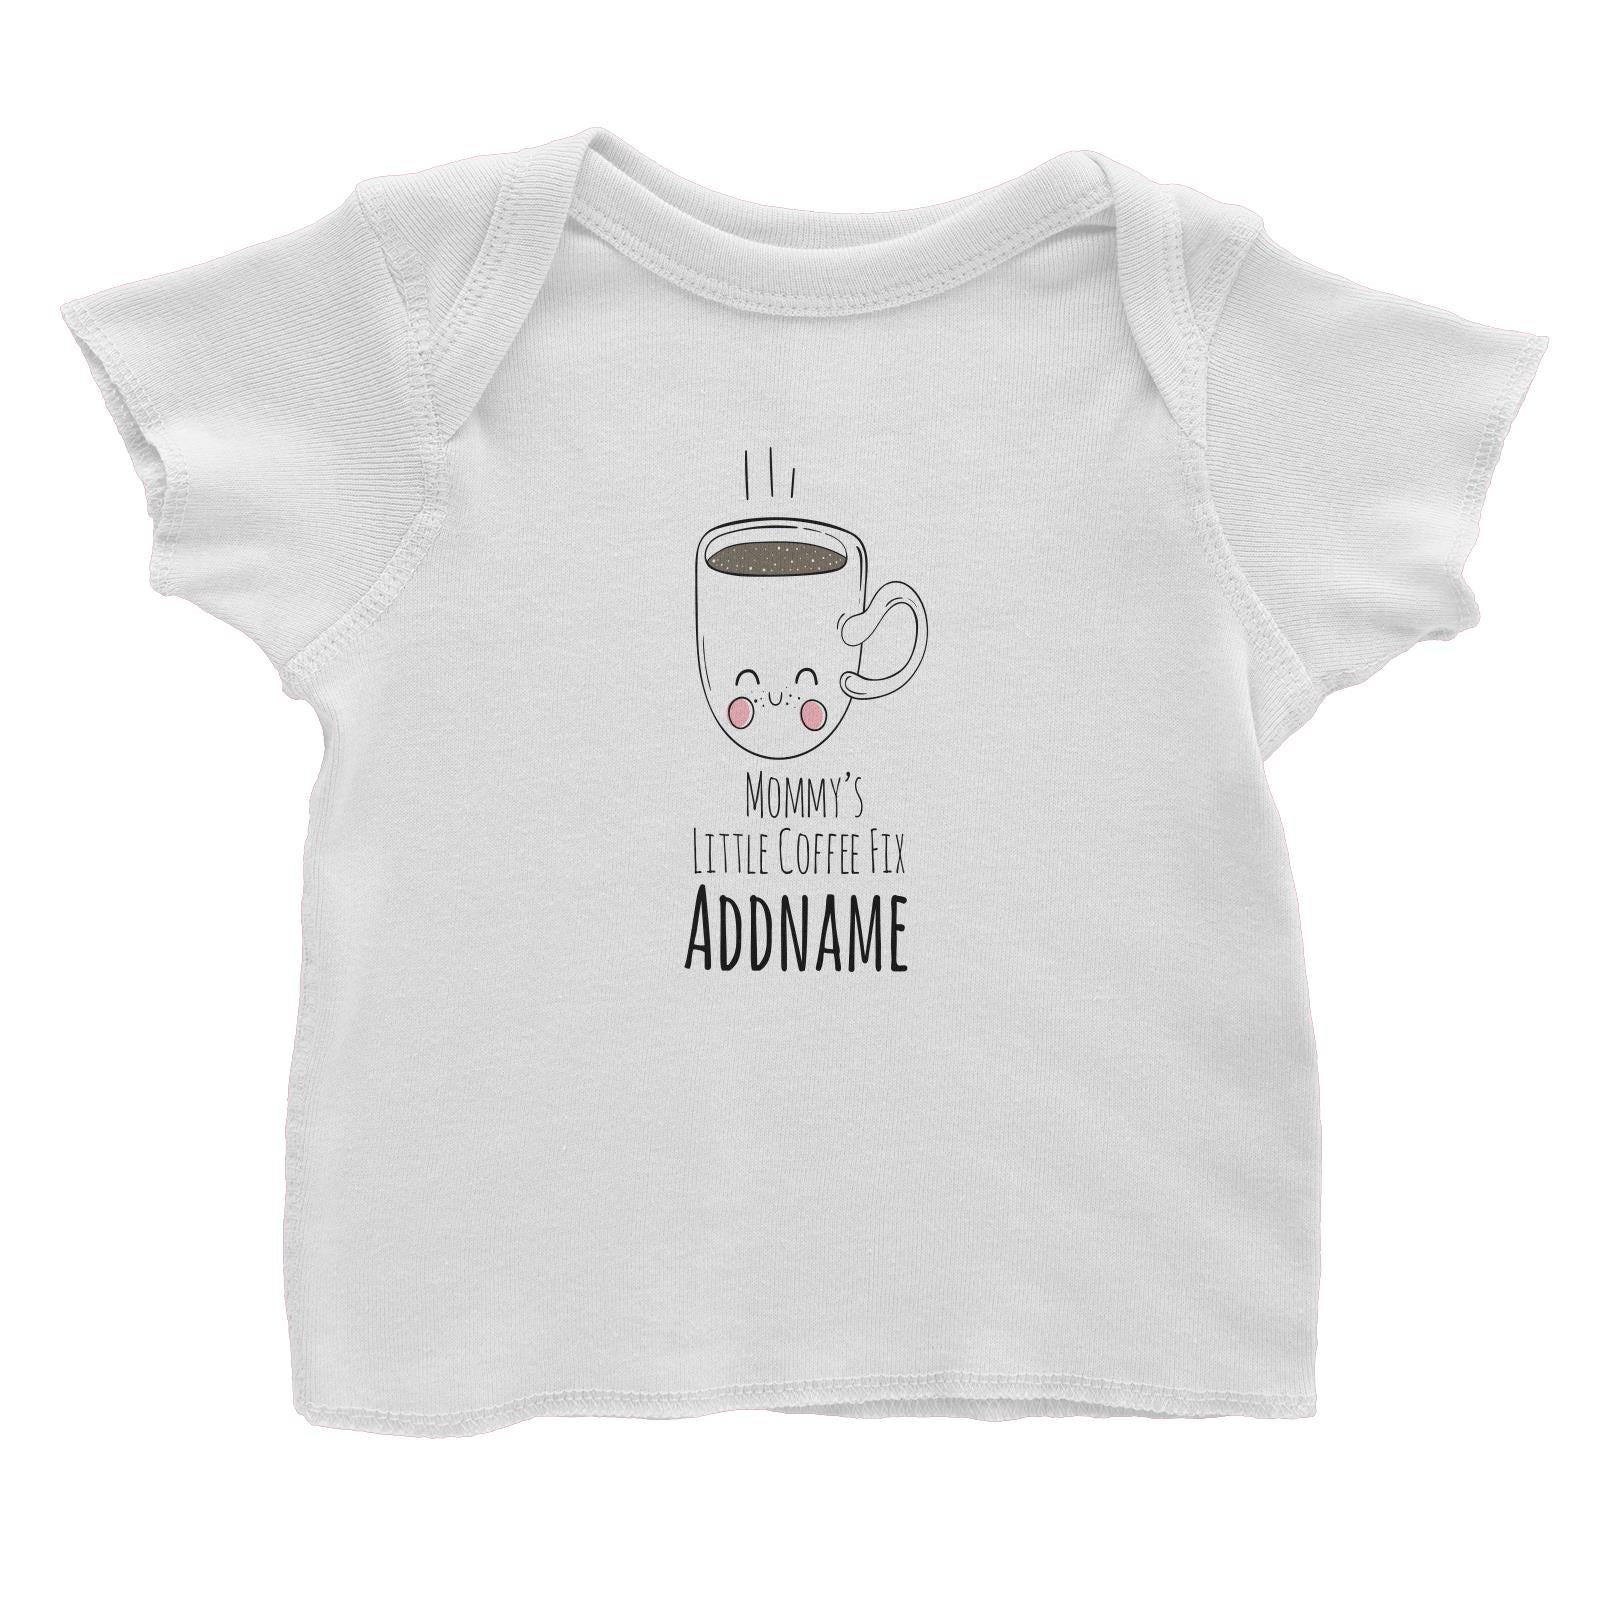 Drawn Sweet Snacks Mommy's Little Coffee Addname Baby T-Shirt